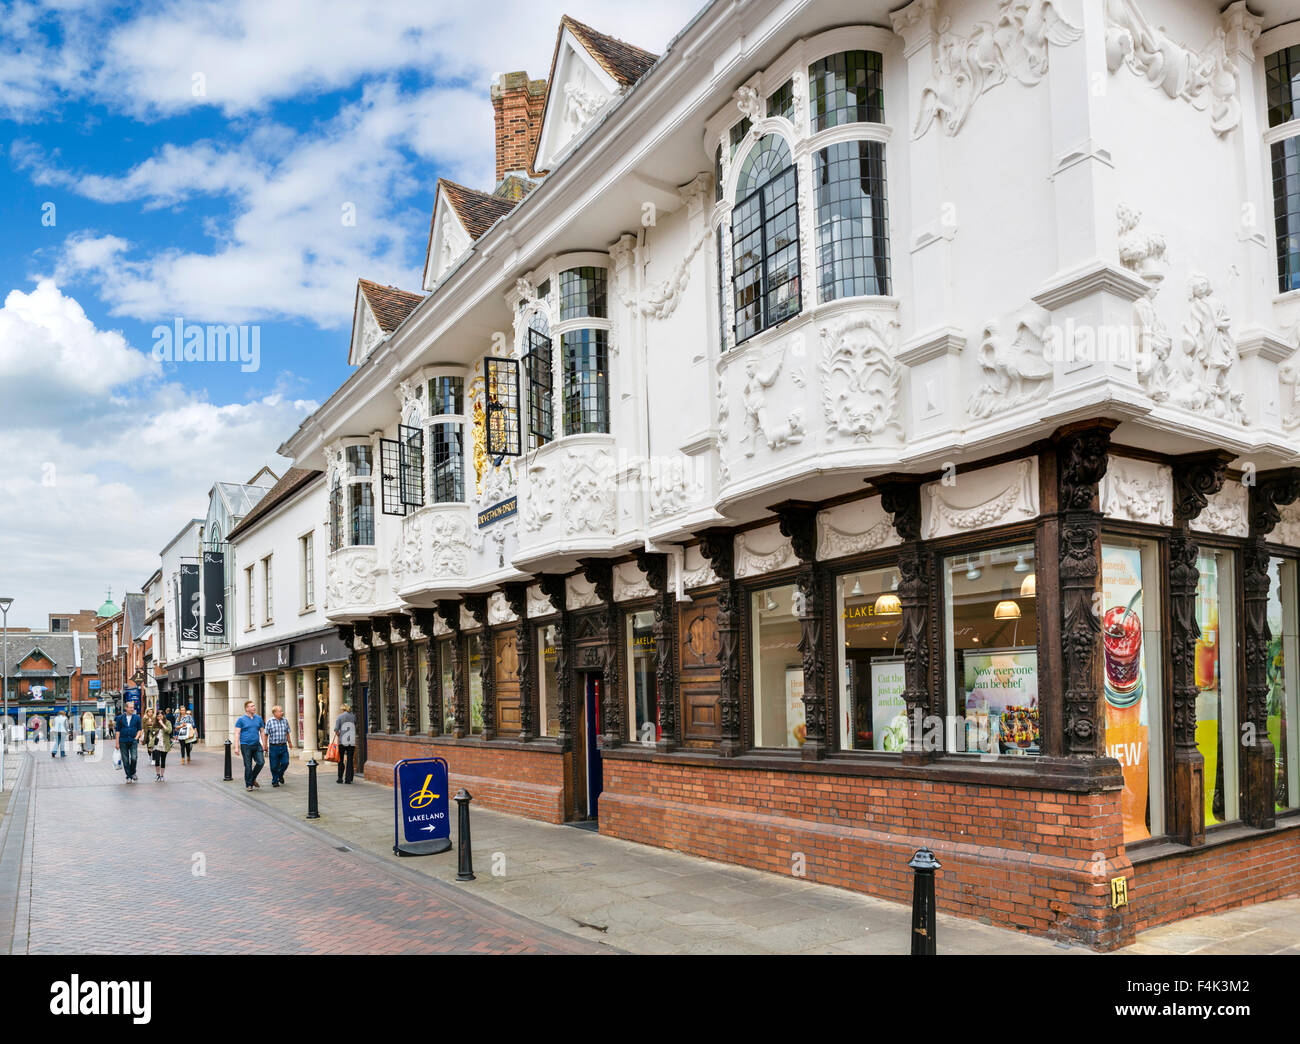 The 15thC Ancient House, or Sparrowes House, Buttermarket, Ipswich, Suffolk, England, UK Stock Photo